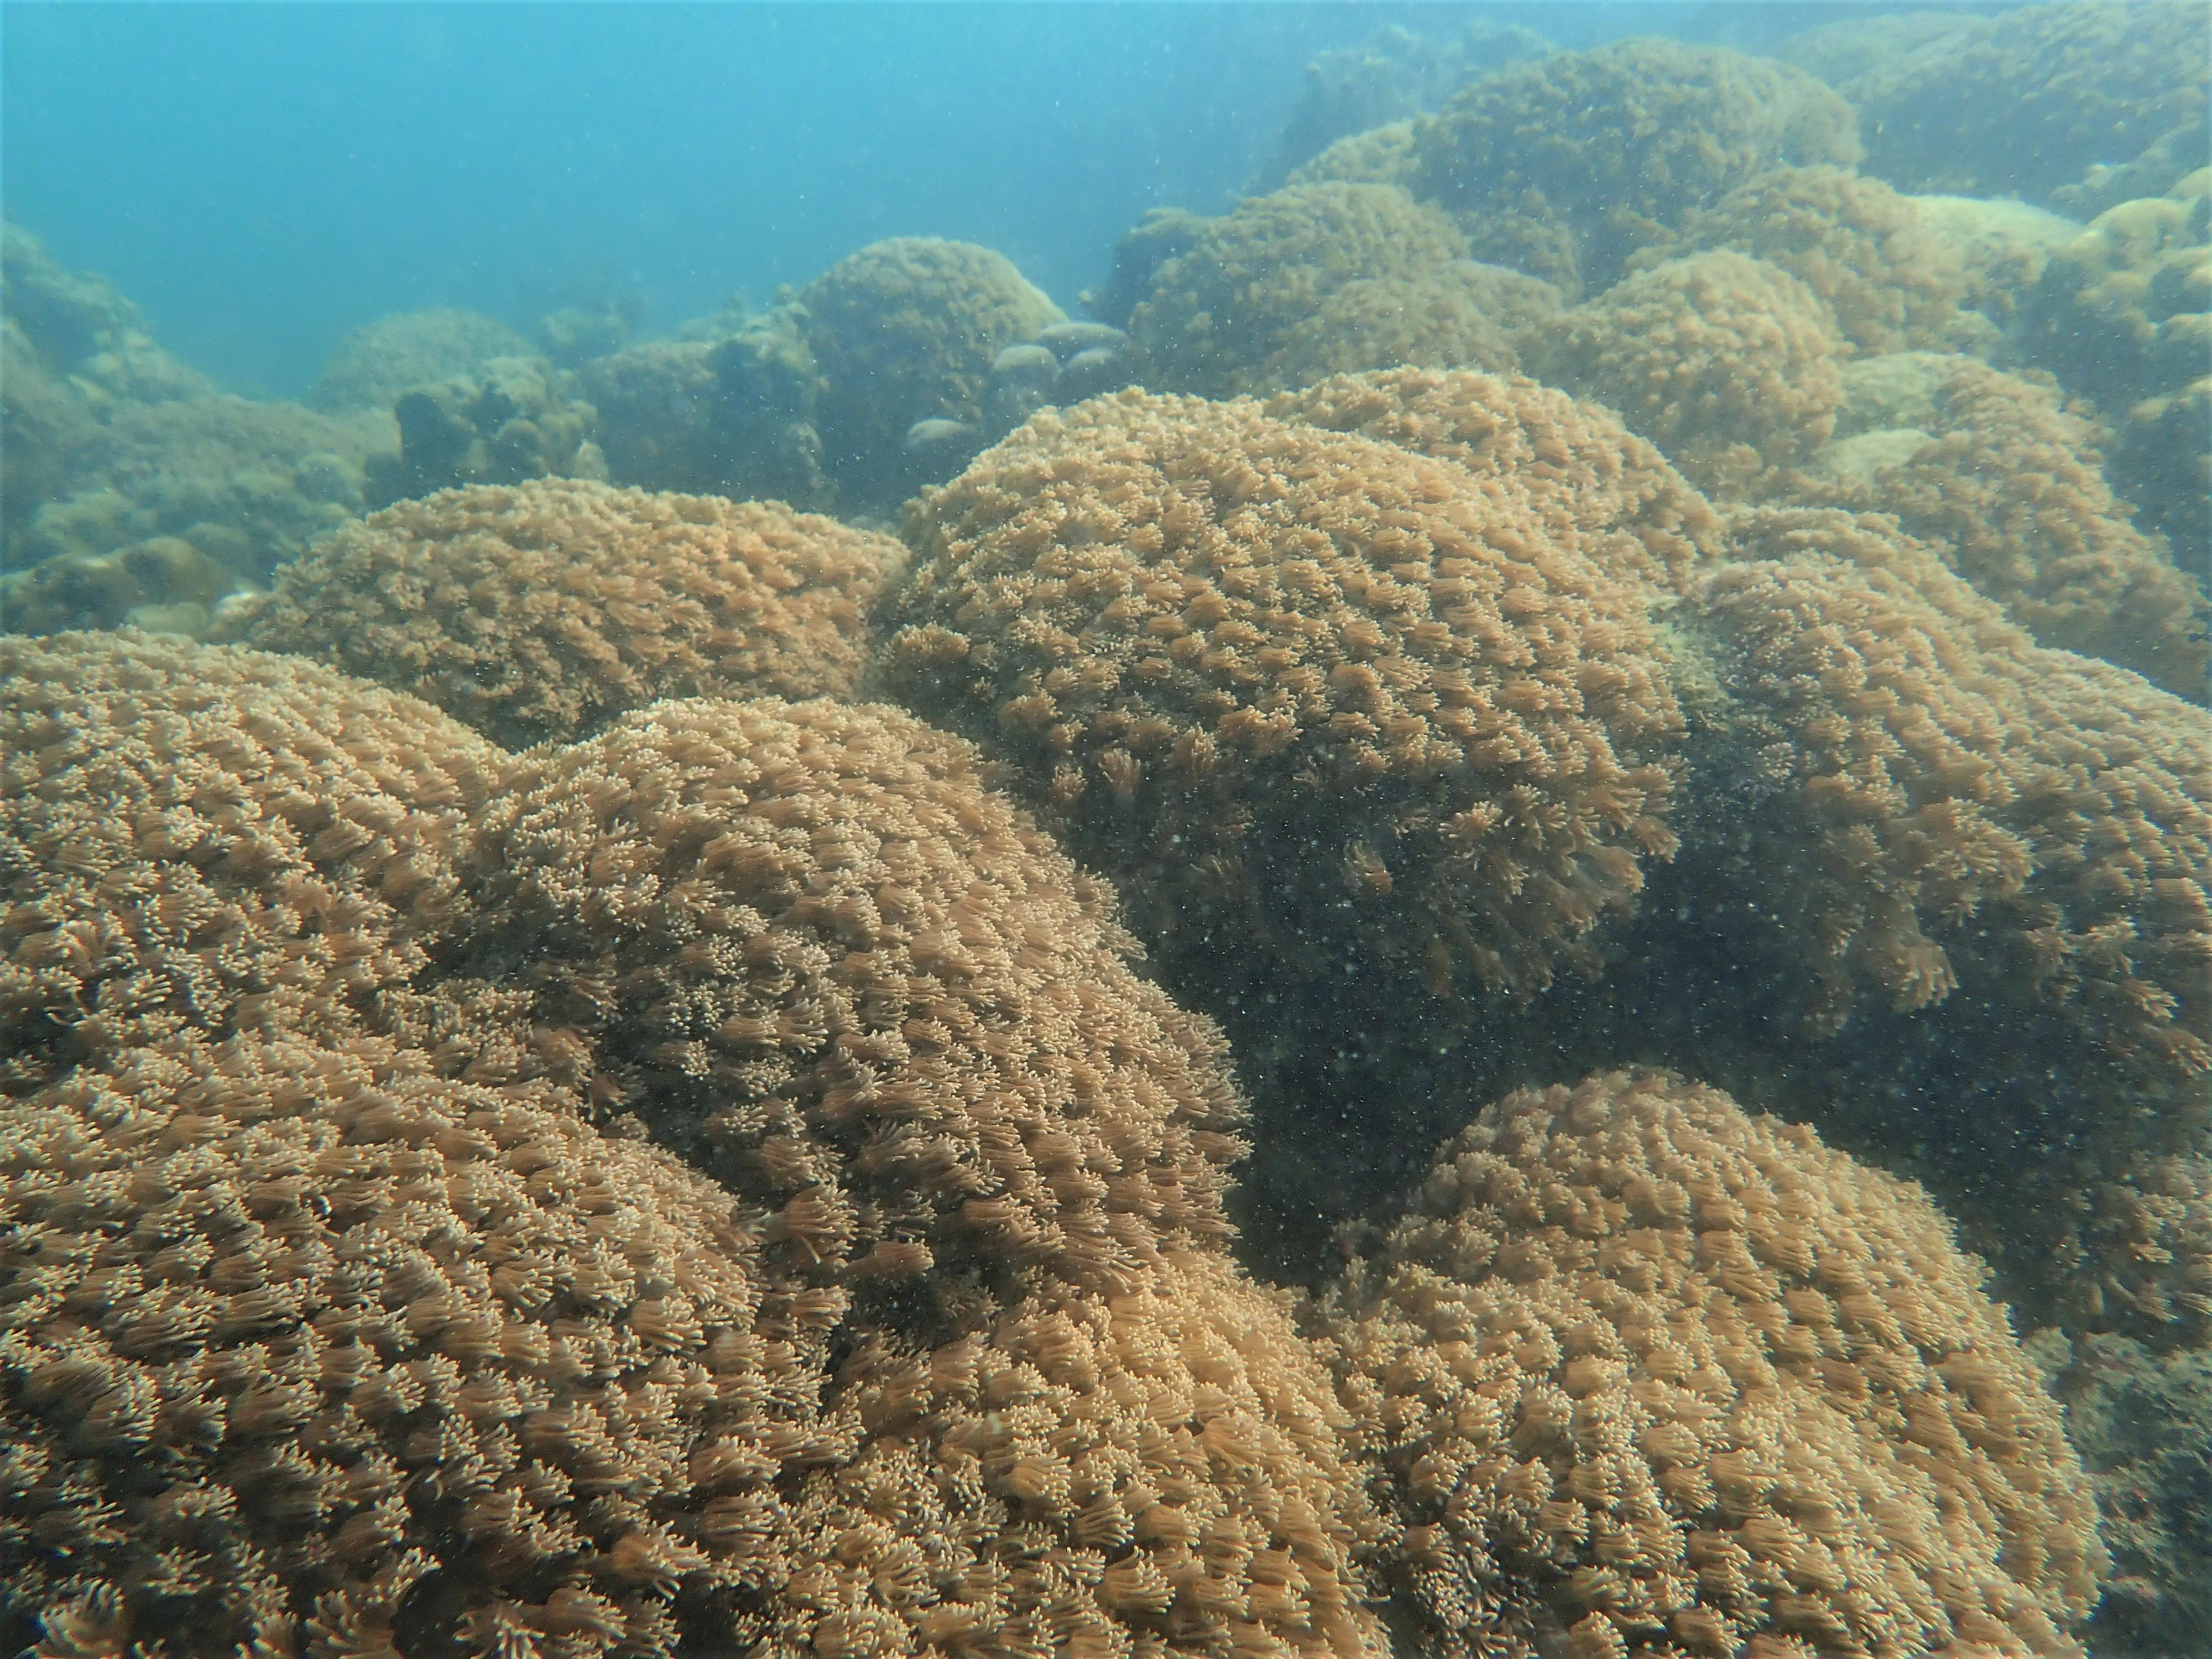 The Agriculture, Fisheries and Conservation Department announced today (December 10) that the results of the Hong Kong Reef Check this year showed that local corals are generally in a healthy condition and that the species diversity remains on the high side. Photo shows Daisy corals at Sharp Island East.